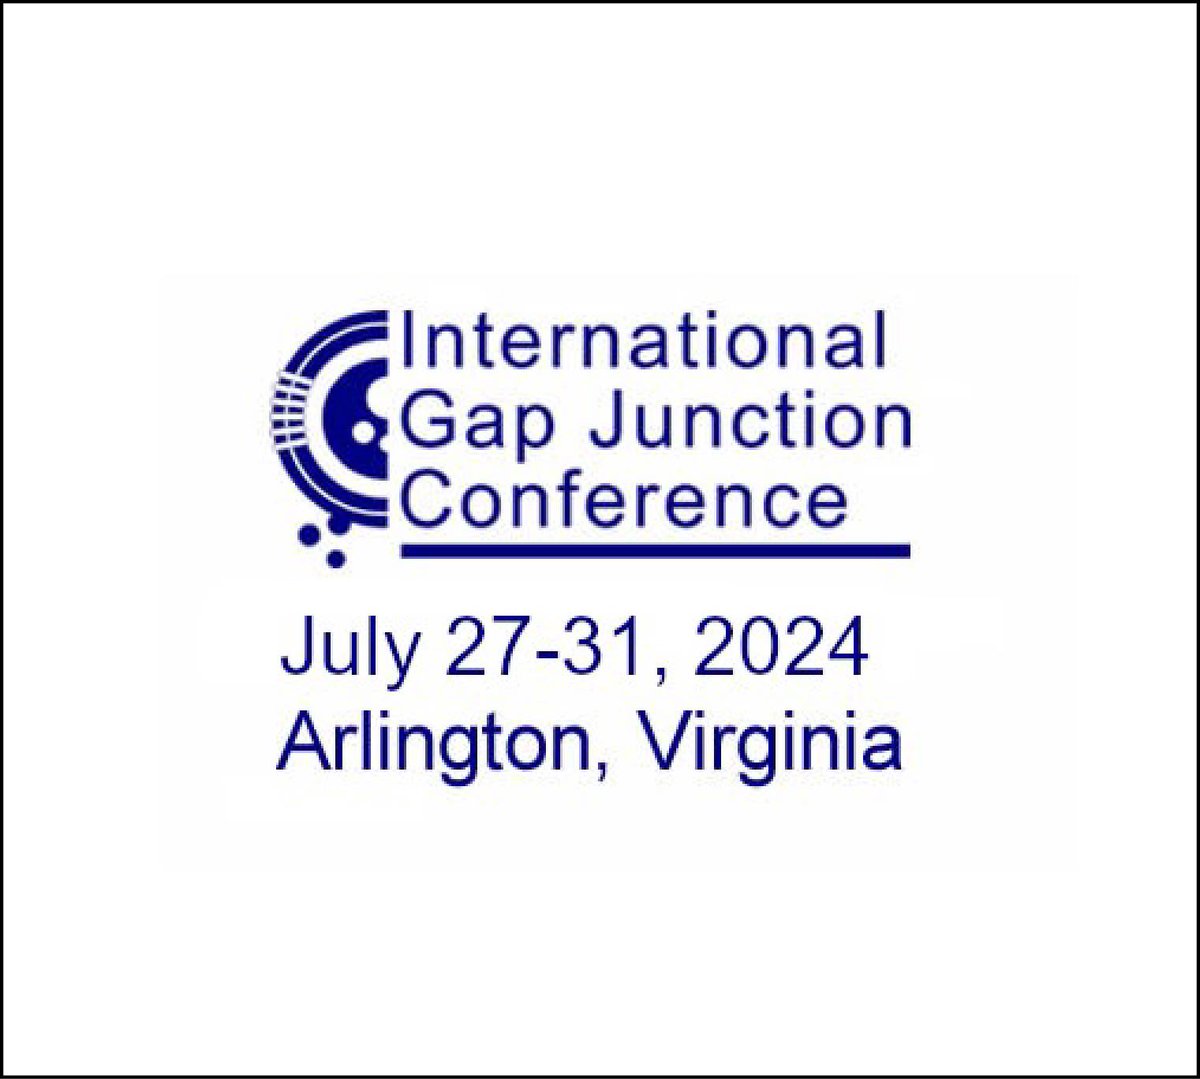 Two weeks left to submit your abstracts for talks at @igjc2024 in DC. Posters only after May 1. Register today at igjconference.org #gapjunctions #pannexins #connexins #innexins